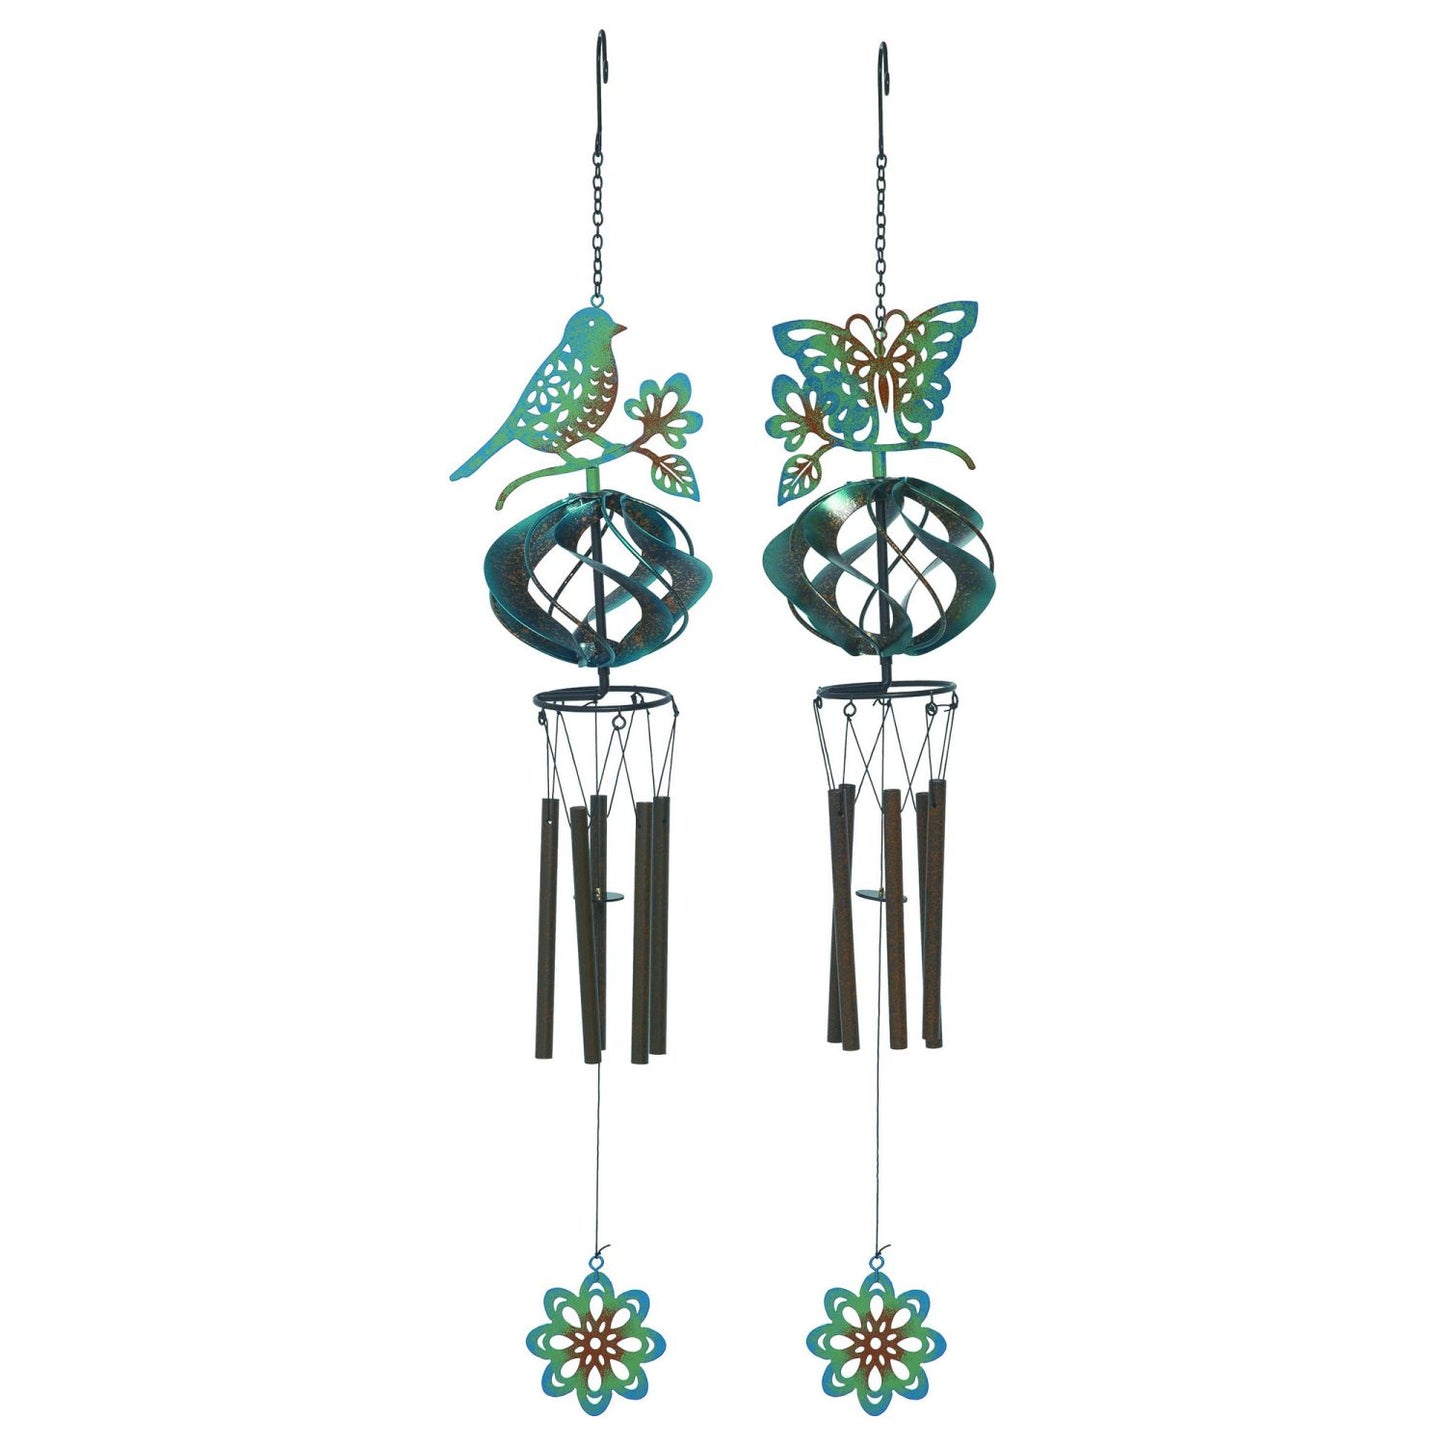 Transpac Metal Patina Spinner Chime, Set Of 2, Assortment